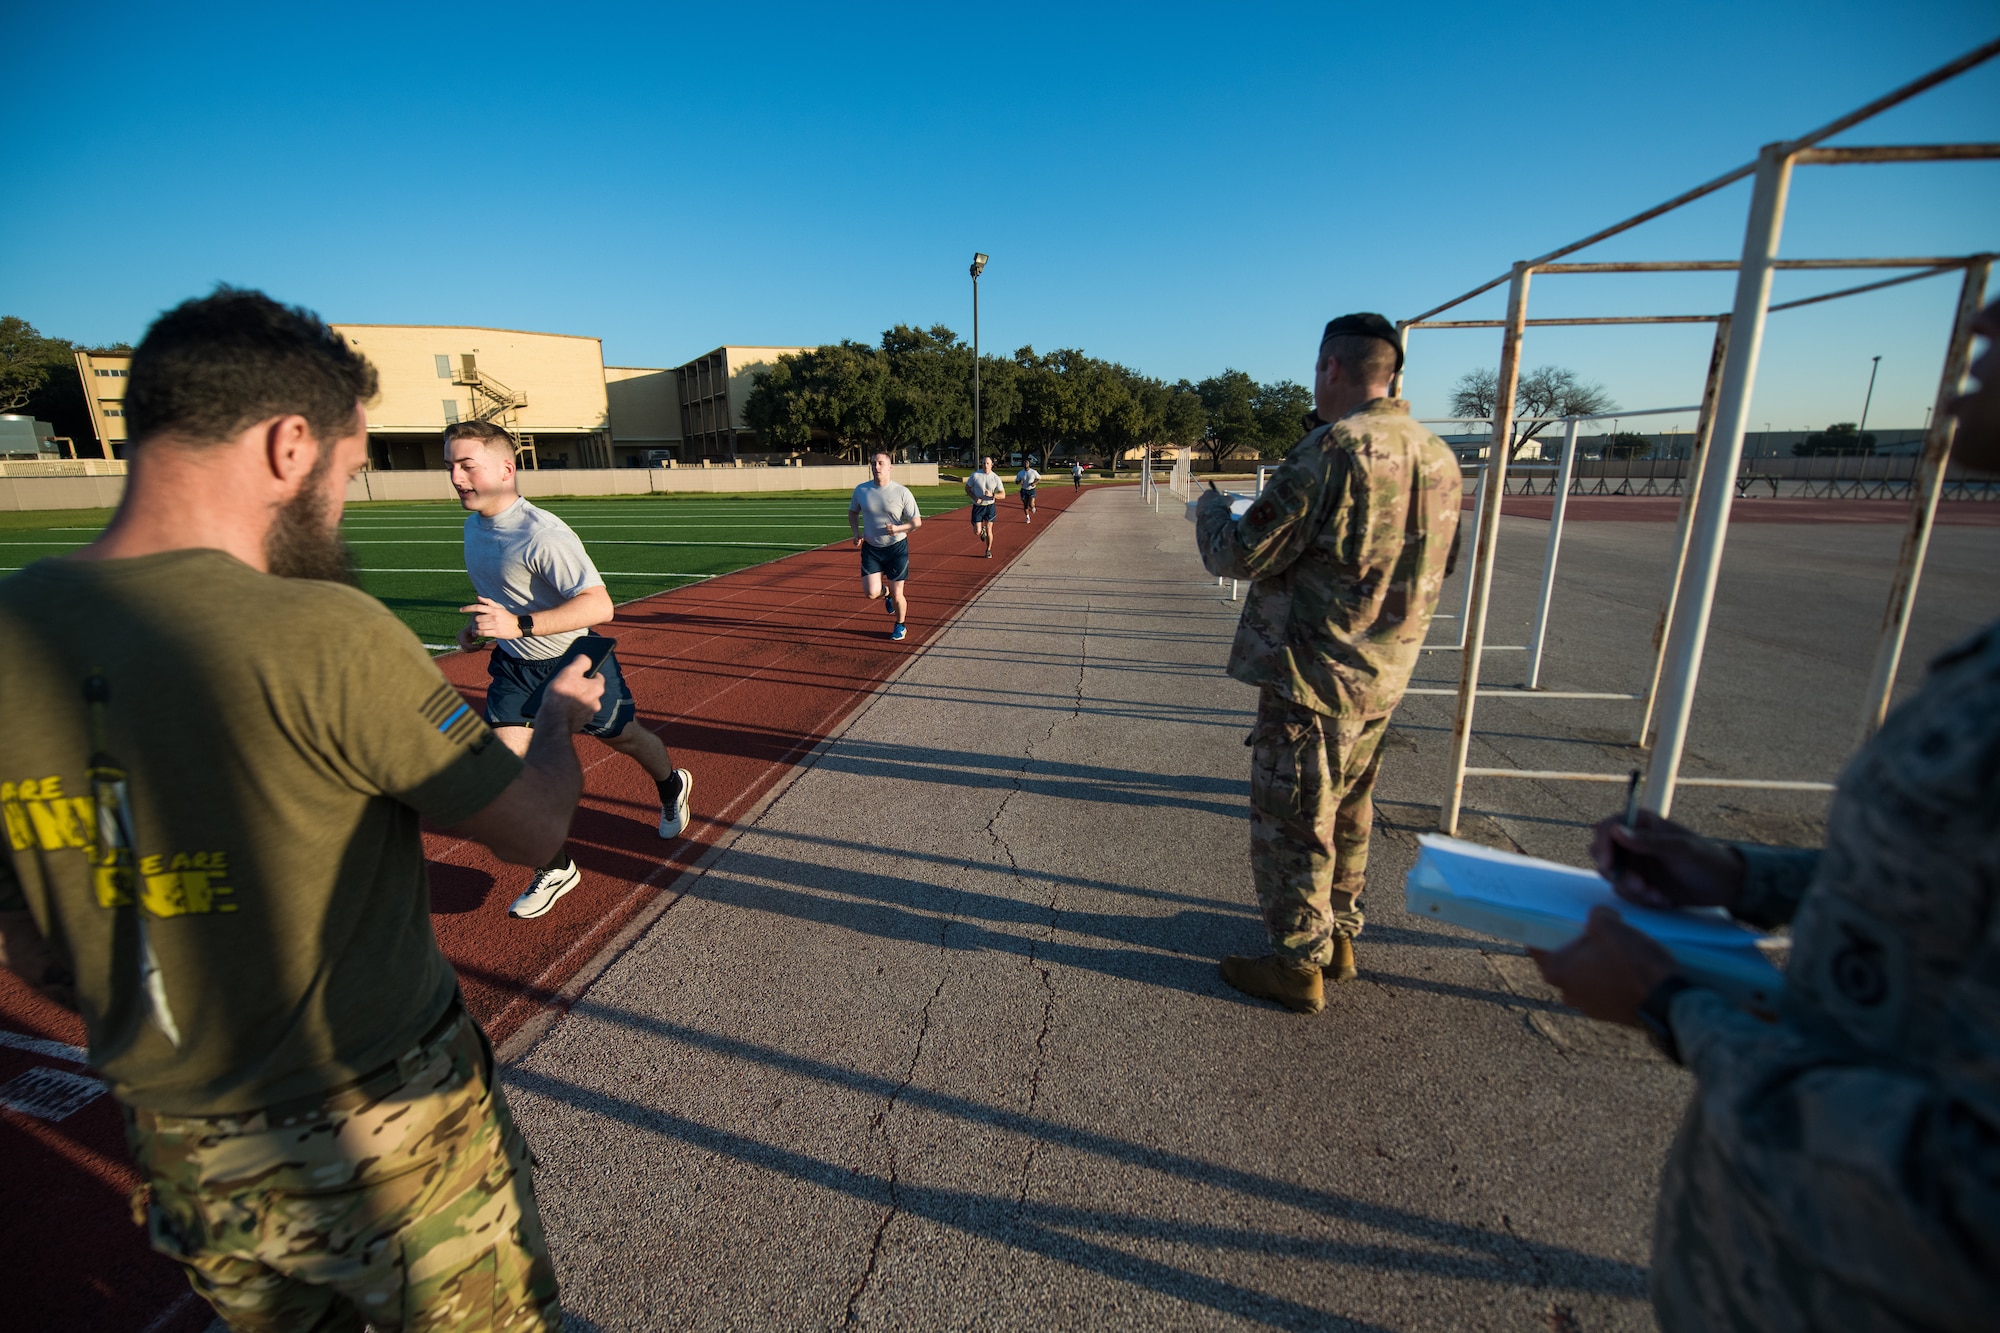 U.S. Air Force Security Forces Airmen take part in the run portion of a physical fitness test as the opening day of the Air Education and Training Command Defender Challenge team tryout at Joint Base San Antonio-Lackland, Texas, Jan. 27, 2020. The five-day selection camp includes a physical fitness test, M-9 and M-4 weapons firing, the alpha warrior obstacle course, a ruck march and also includes a military working dog tryout as well. A total of 27 Airmen, including five MWD handlers and their canine partners, were invited to tryout for the team. The seven selectees to the AETC team will represent the First Command at the career field’s world-wide competition that will be held at JBSA-Camp Bullis in May 2020. (U.S. Air Force photo by Sarayuth Pinthong)